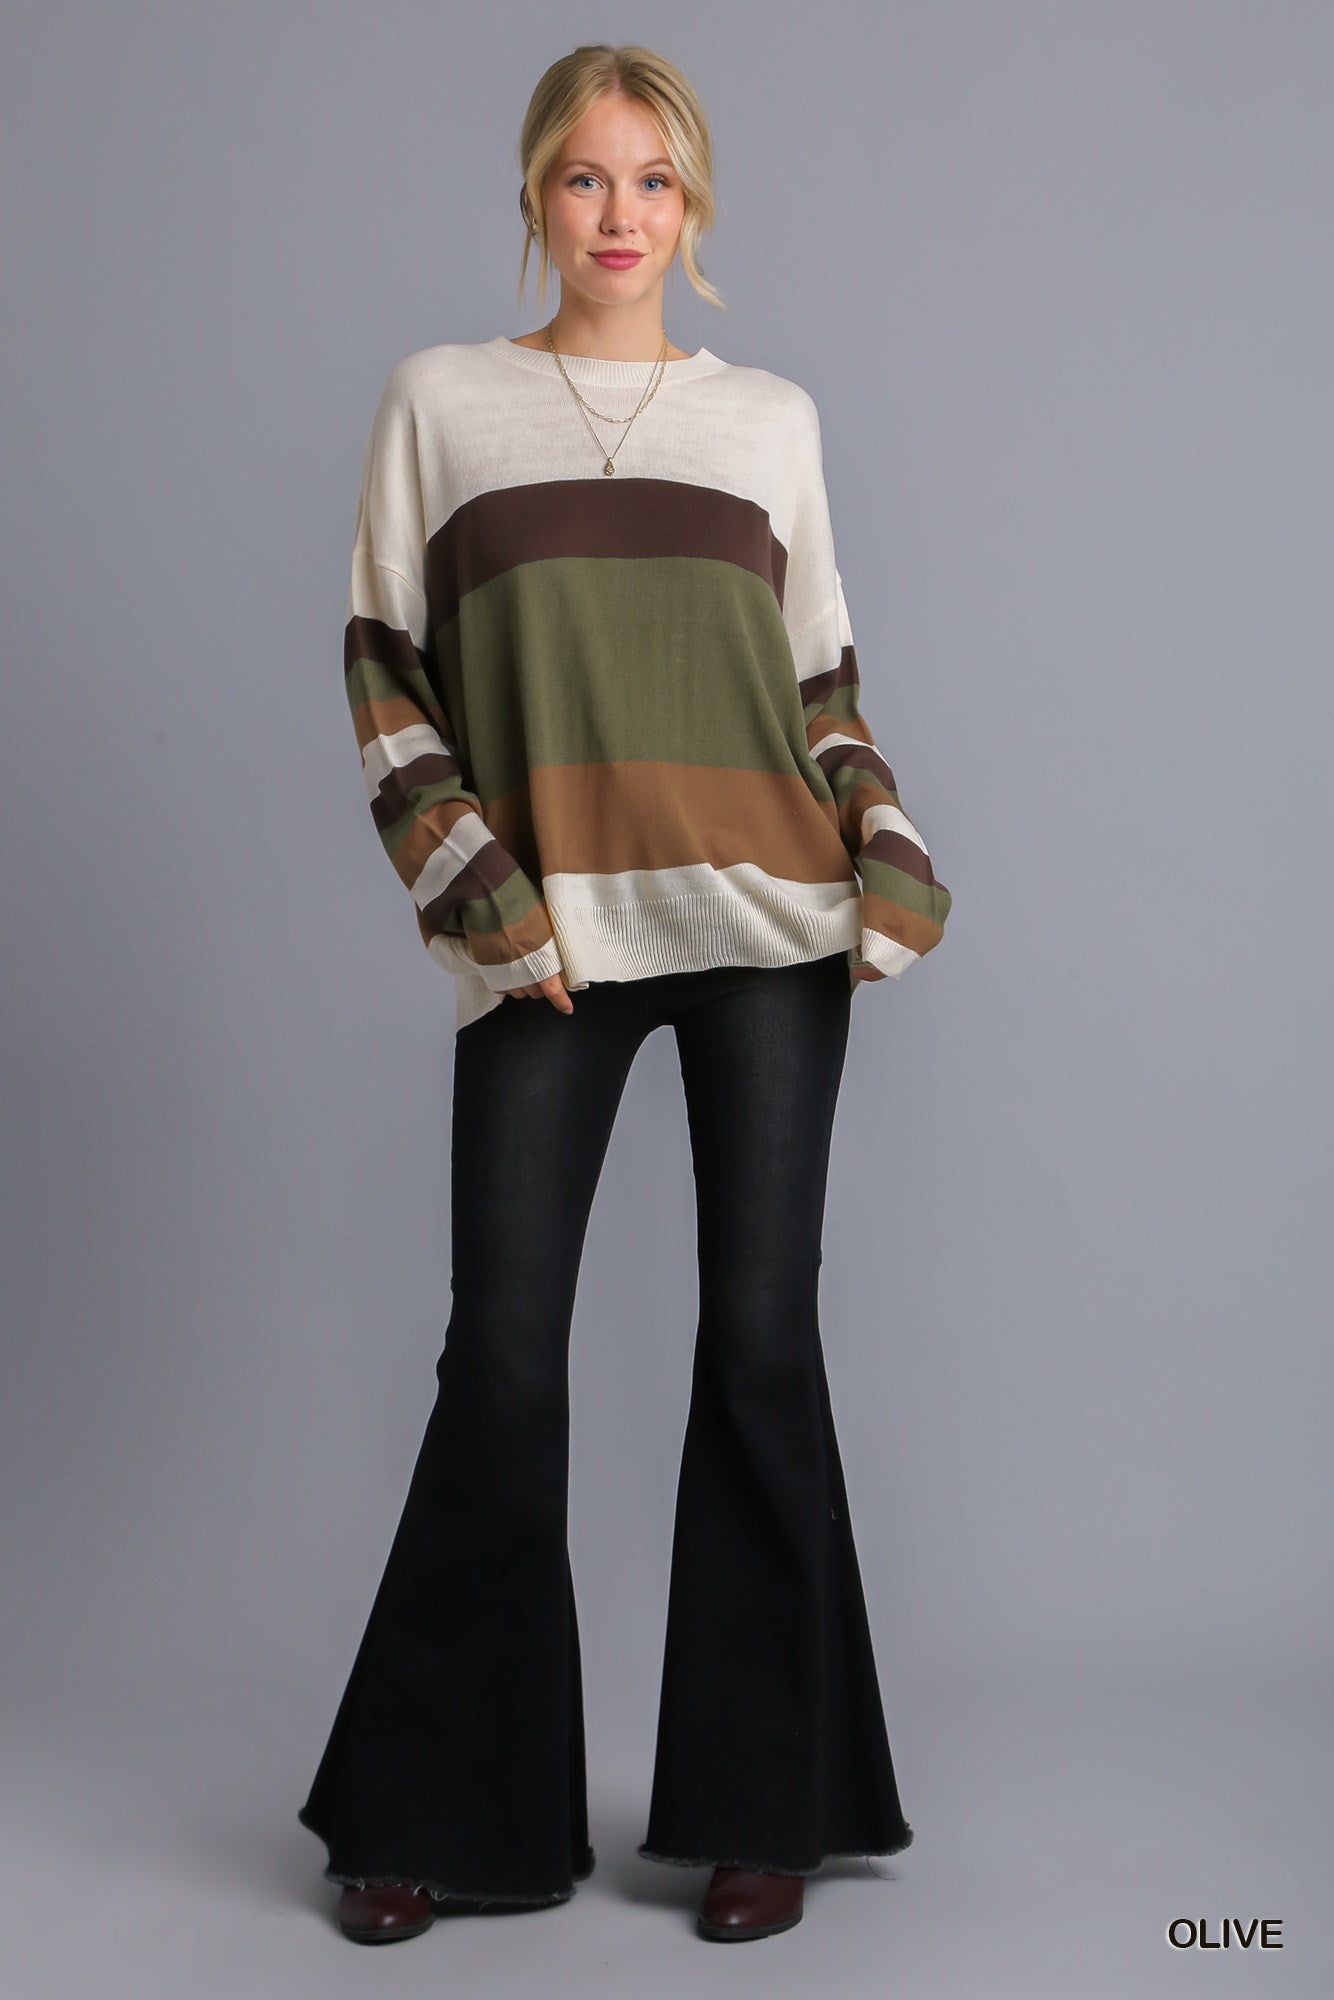 Umgee Stripe Light Weight Long Sleeve Pullover Sweater - Roulhac Fashion Boutique